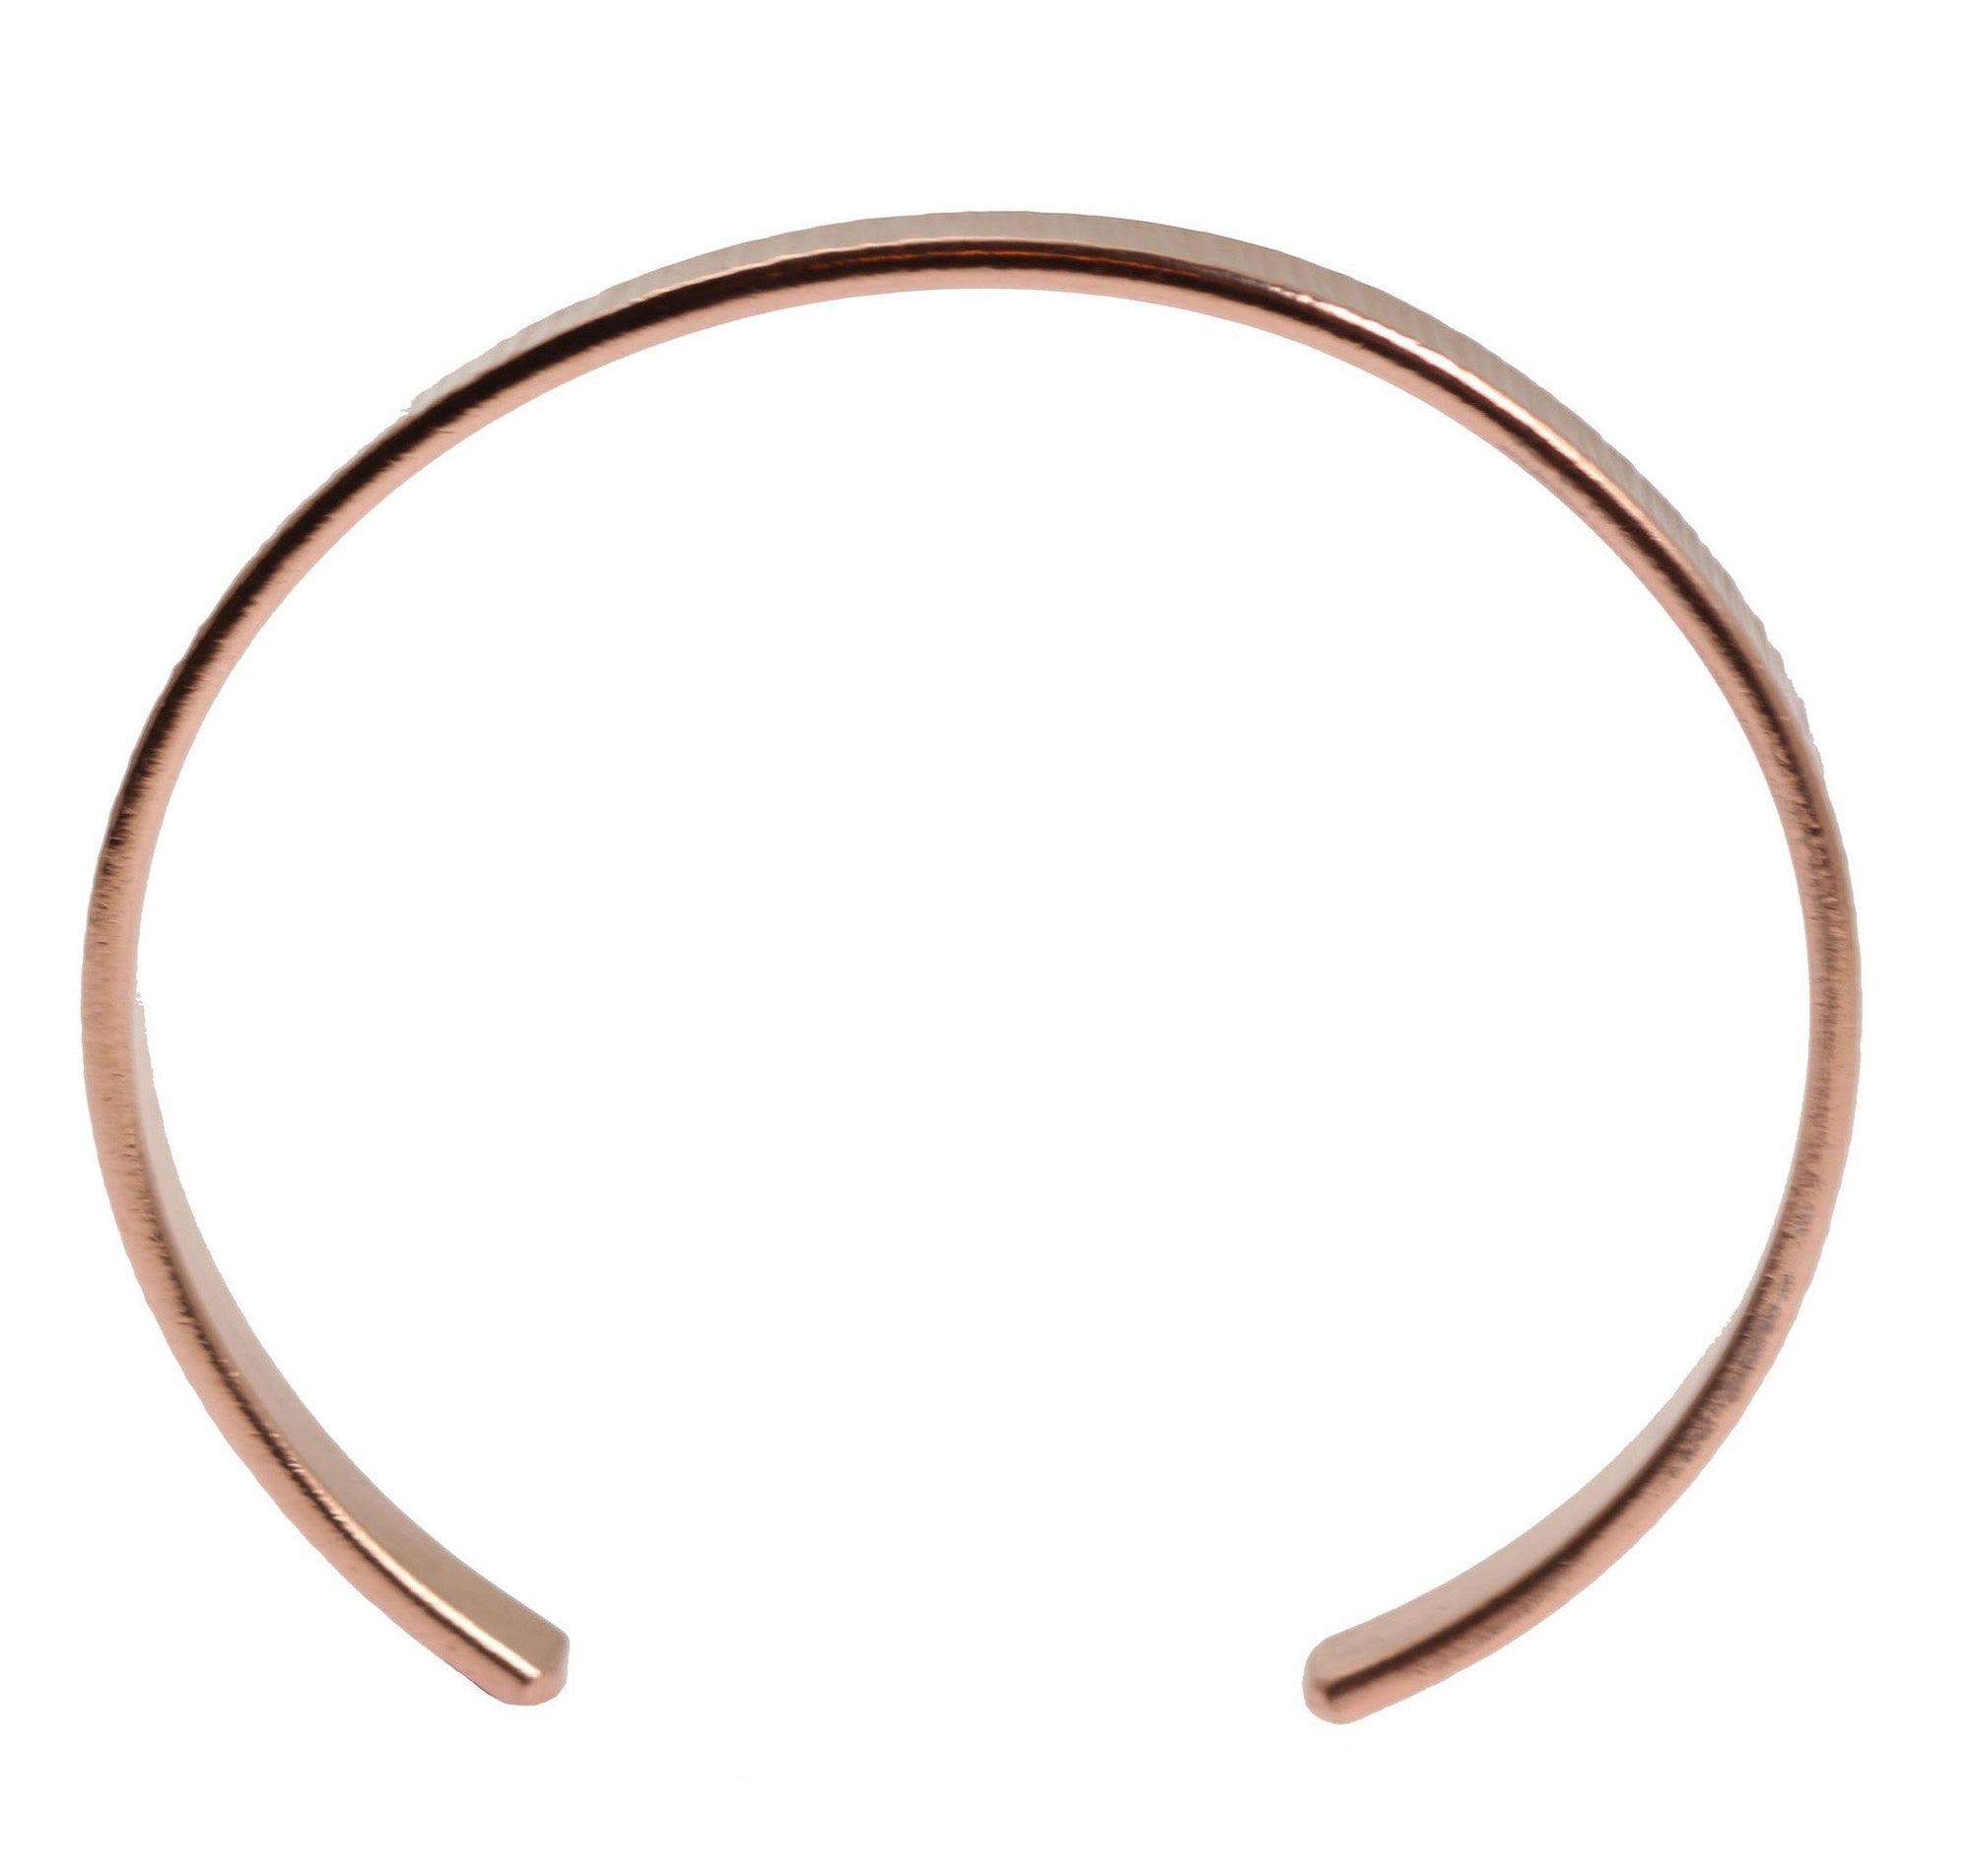 Shape of Chased Thin Copper Cuff Bracelet